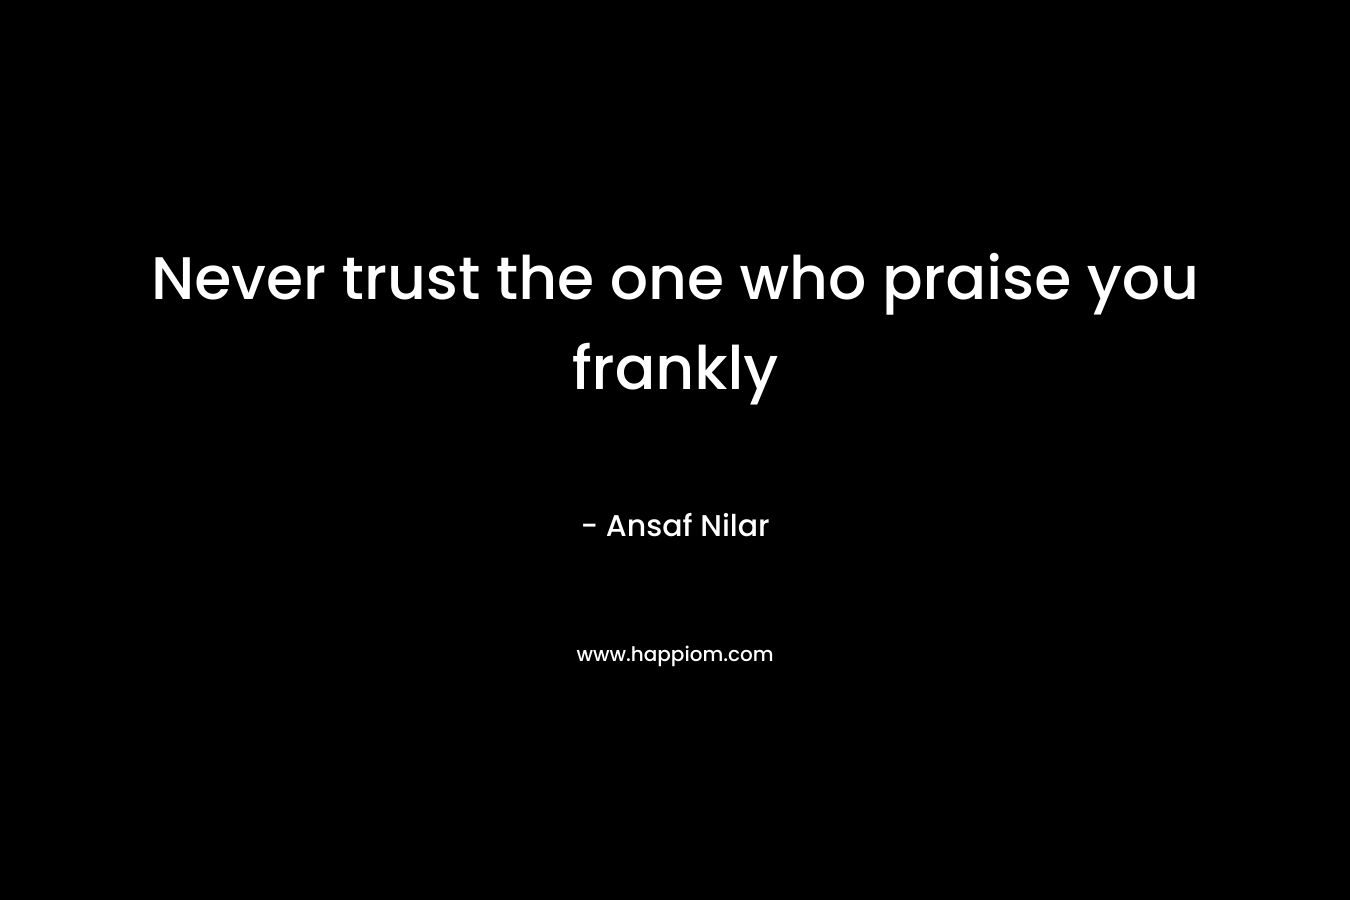 Never trust the one who praise you frankly